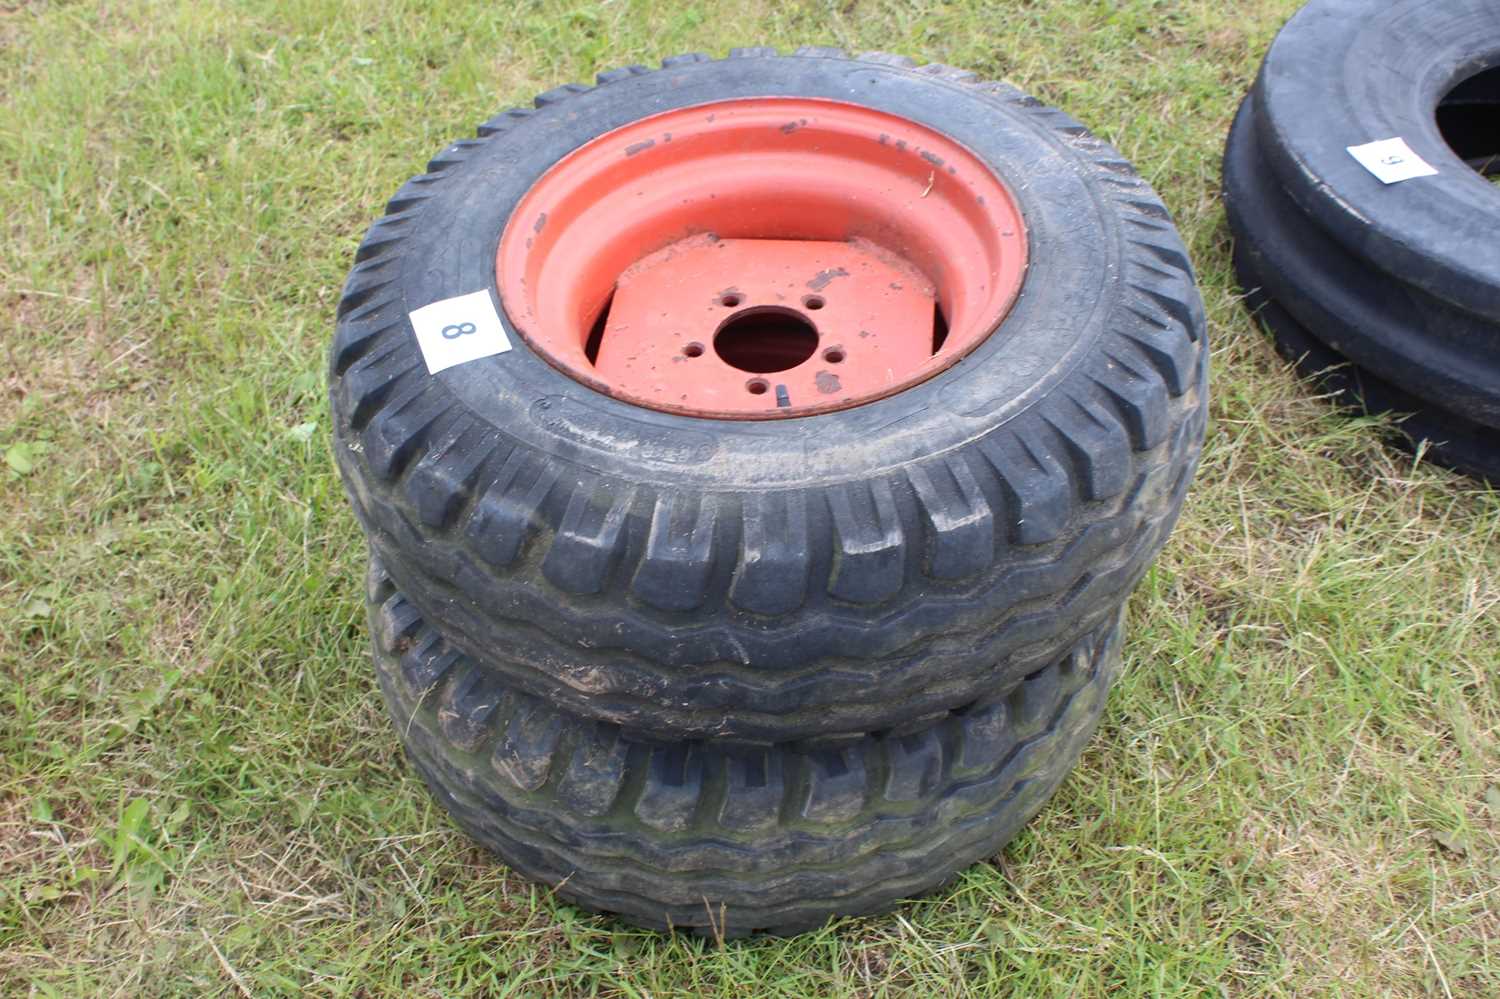 Lot 8 - 1 Pair of Tyres (10/75/15) 6 ply on rims